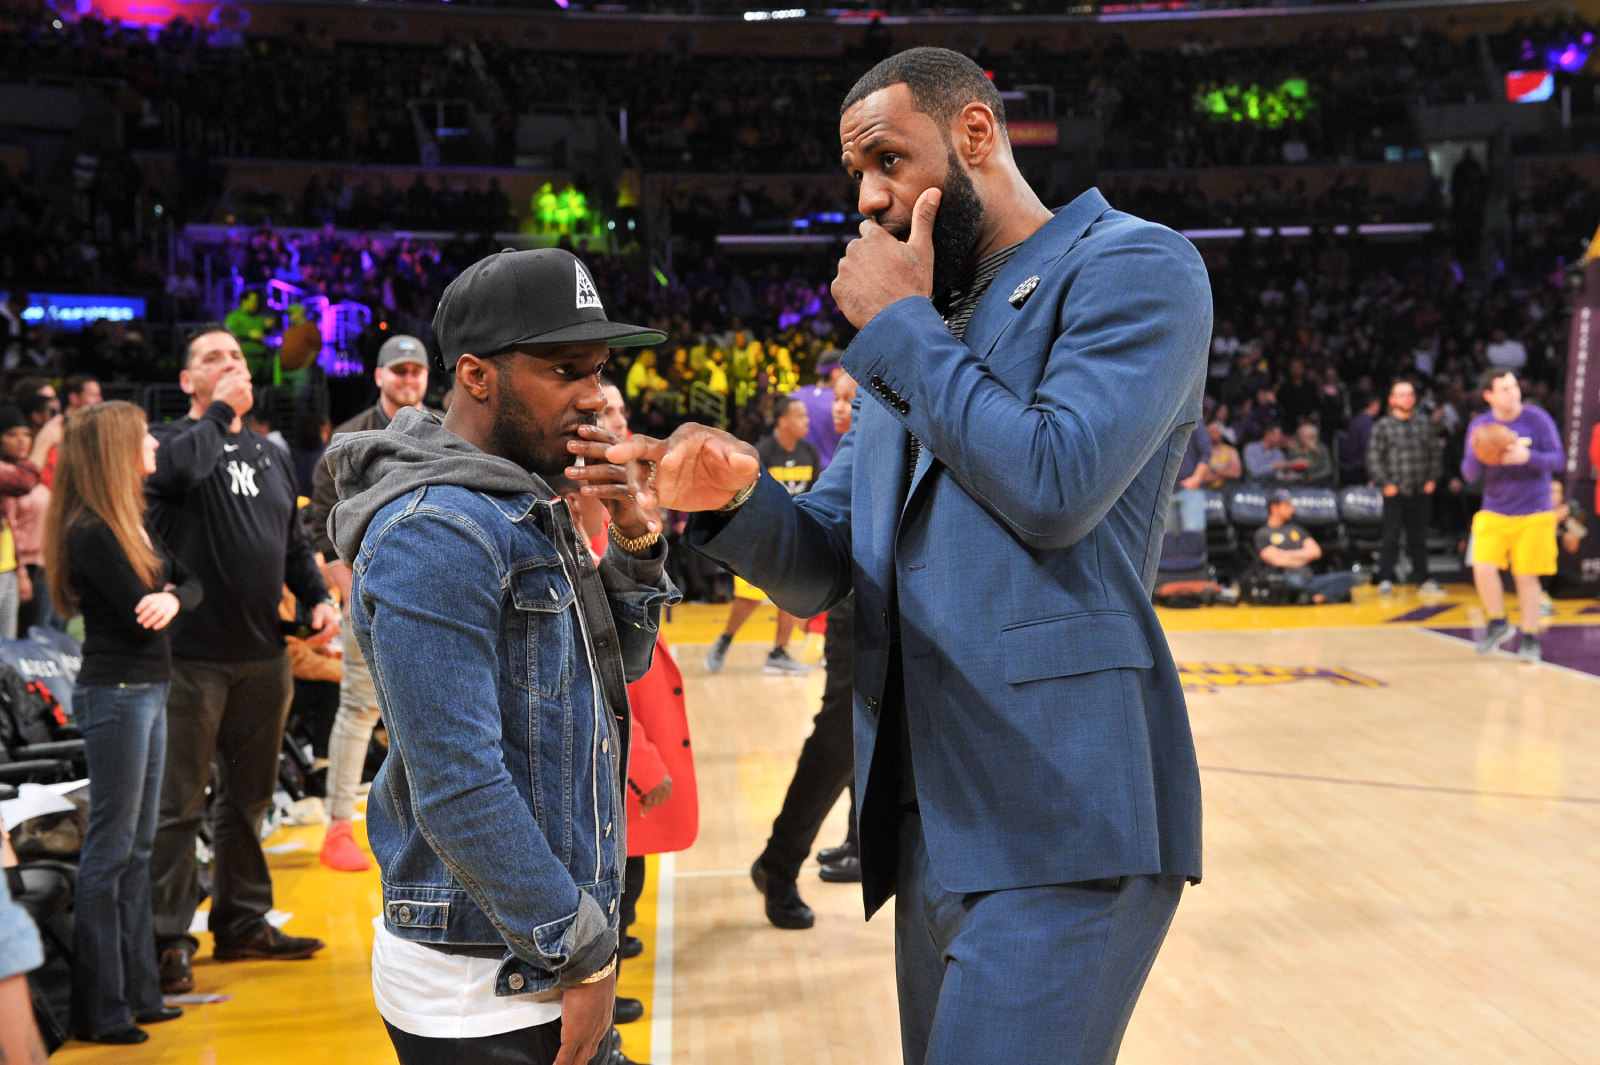 LeBron James and Rich Paul have both become pretty successful. One NBA player agent, though, is not happy with them at all.